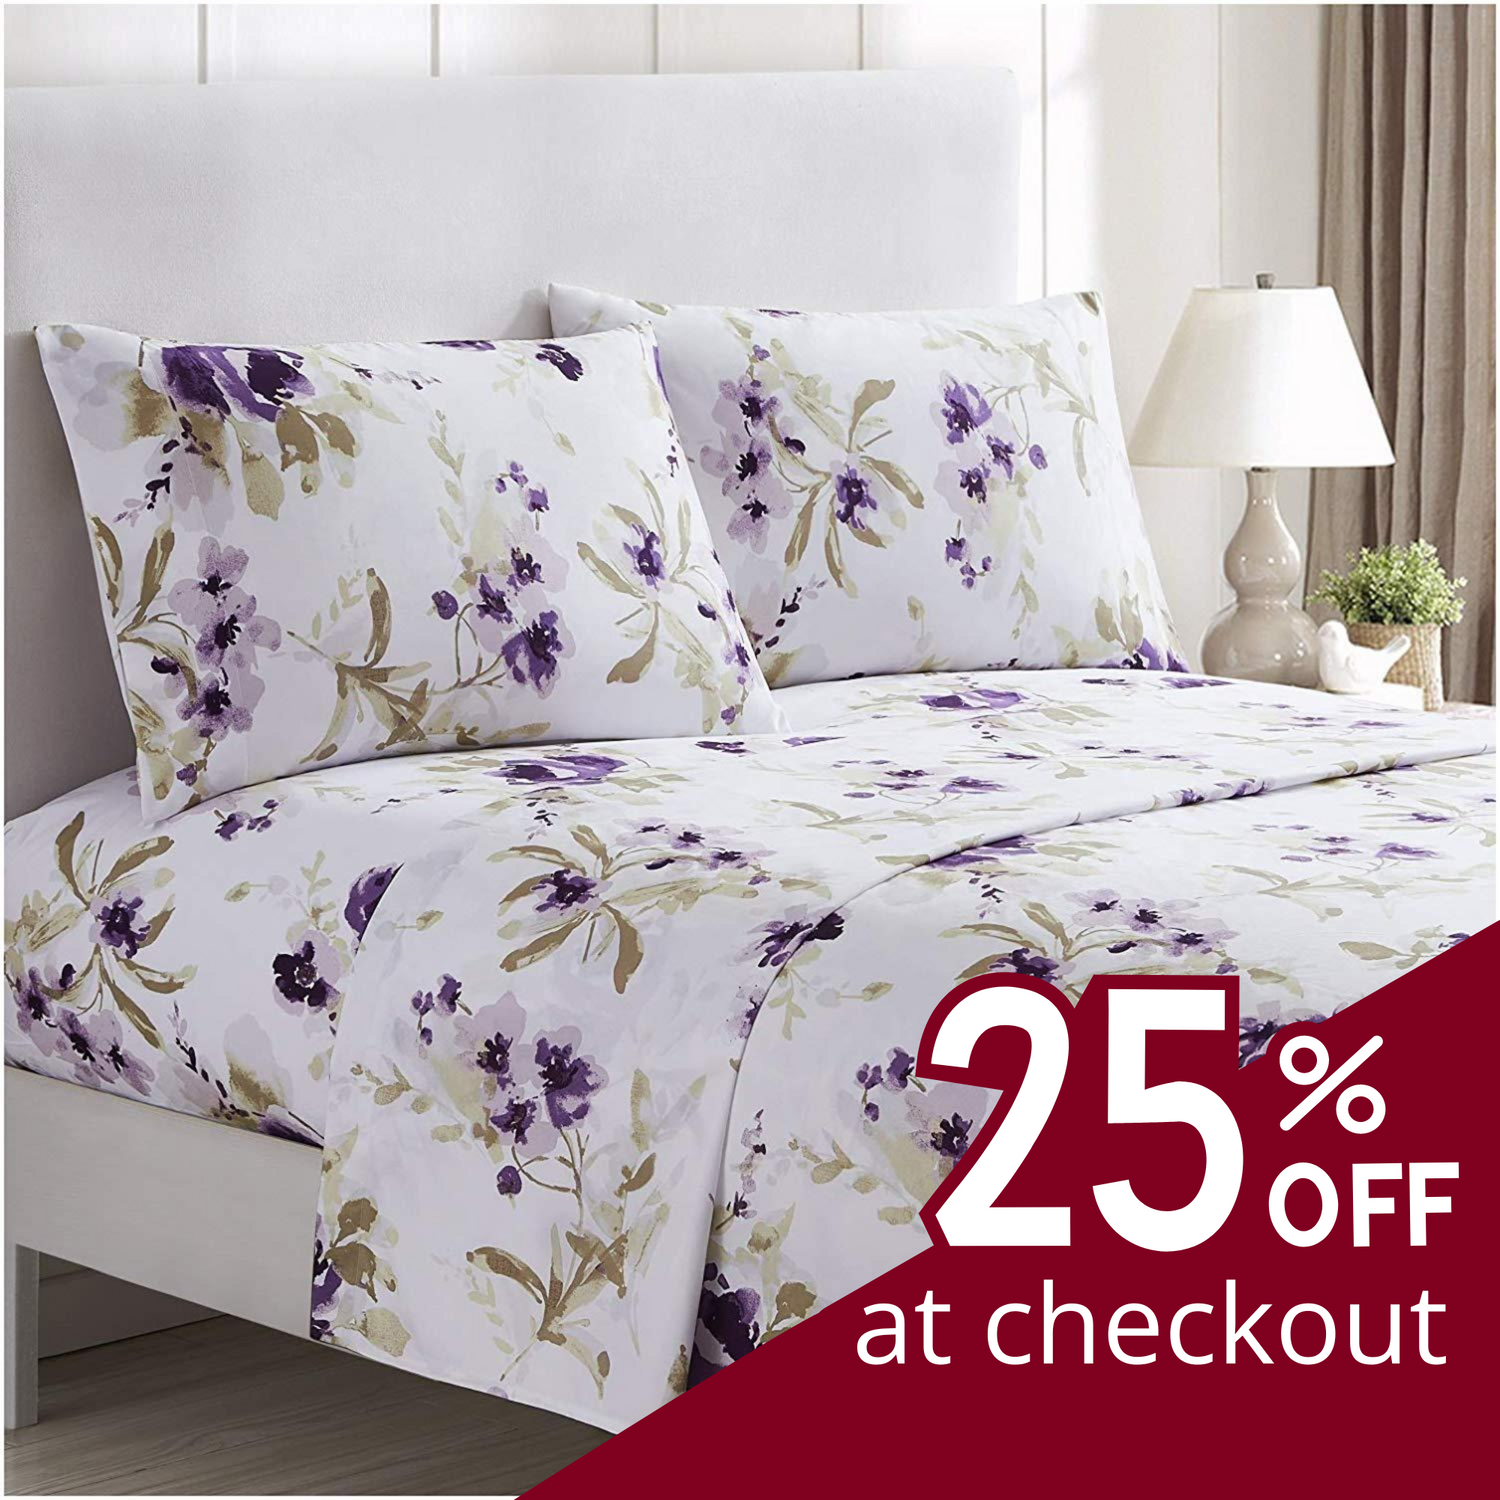 Iconic Collection Microfiber Sheet Set with Colorful Prints